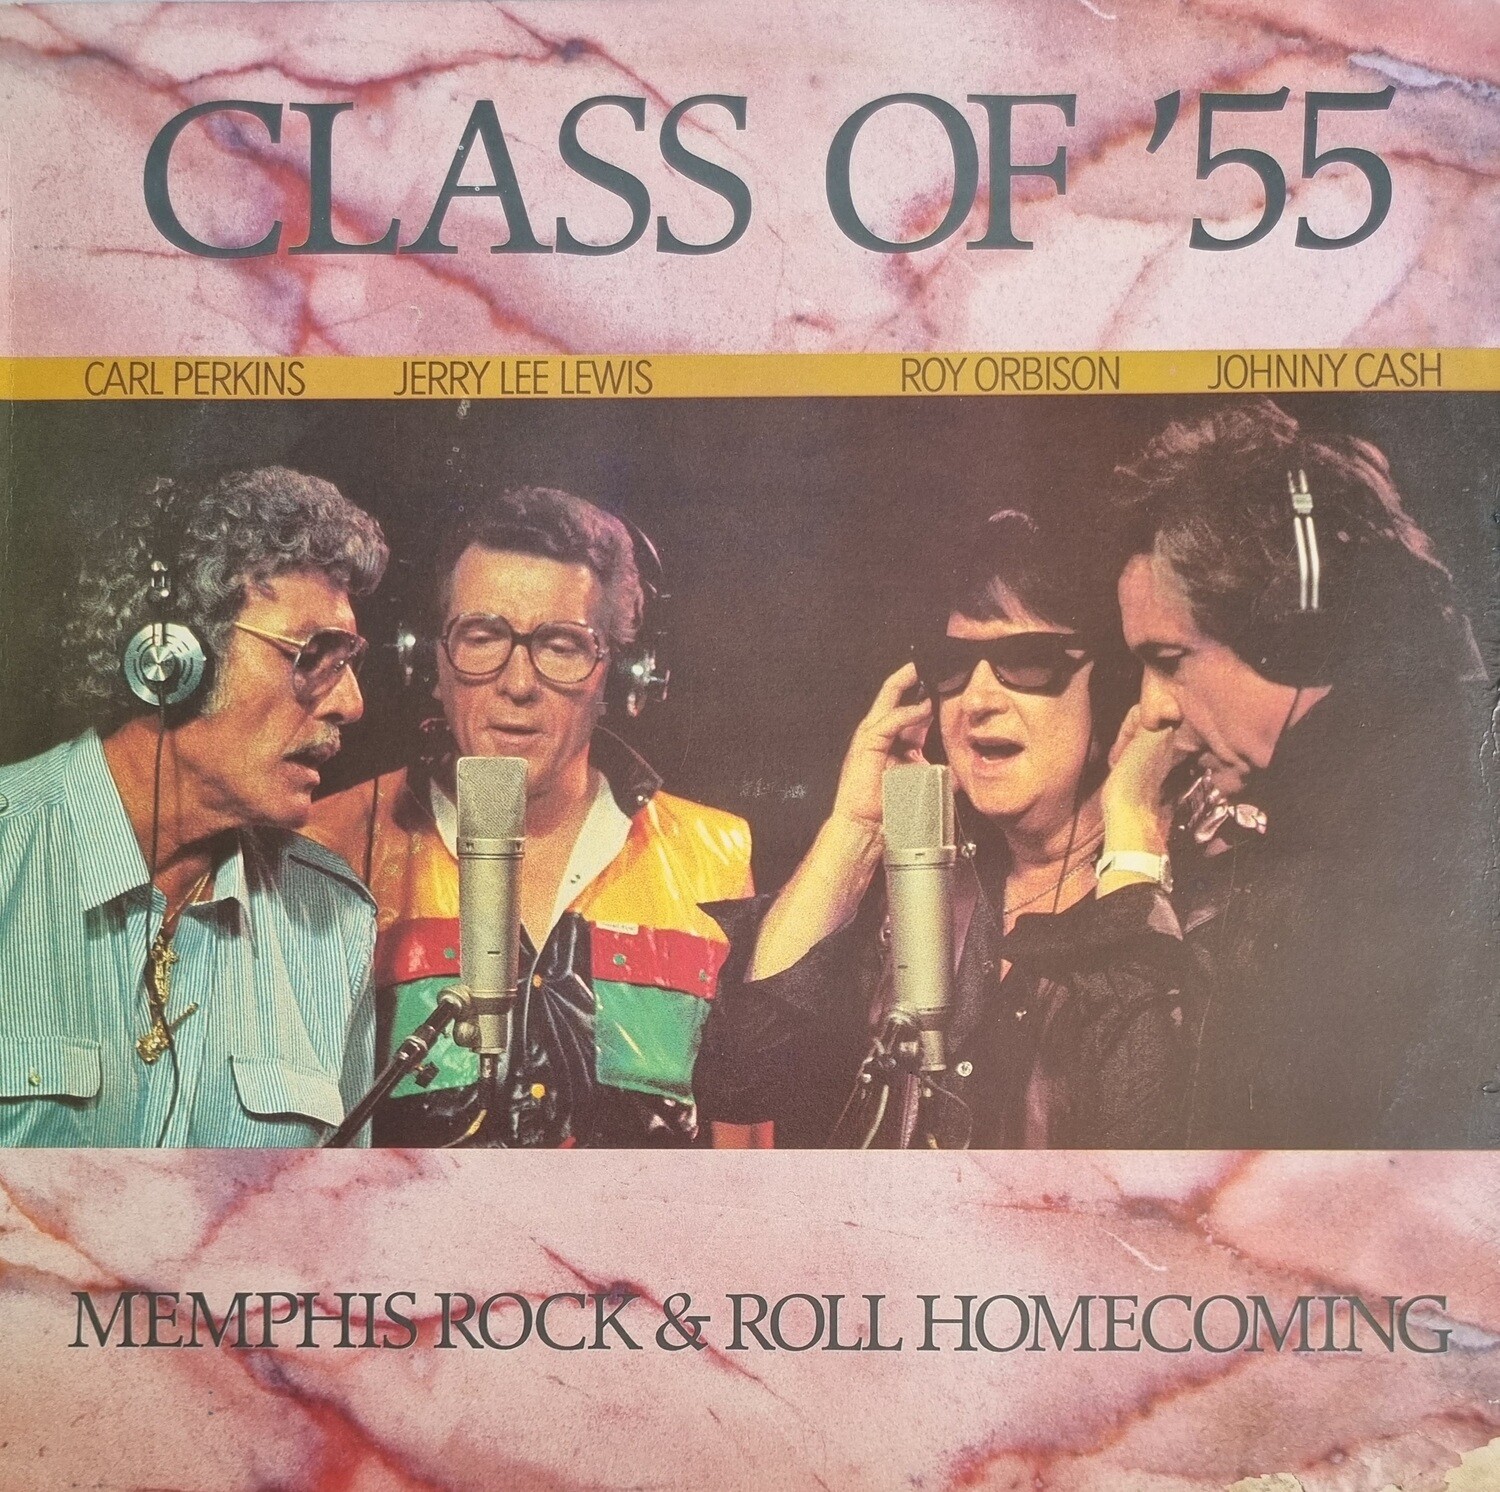 Class Of '55 = Carl Perkins / Jerry Lee Lewis / Roy Orbison / Johnny Cash – Memphis Rock & Roll Homecoming (1987)